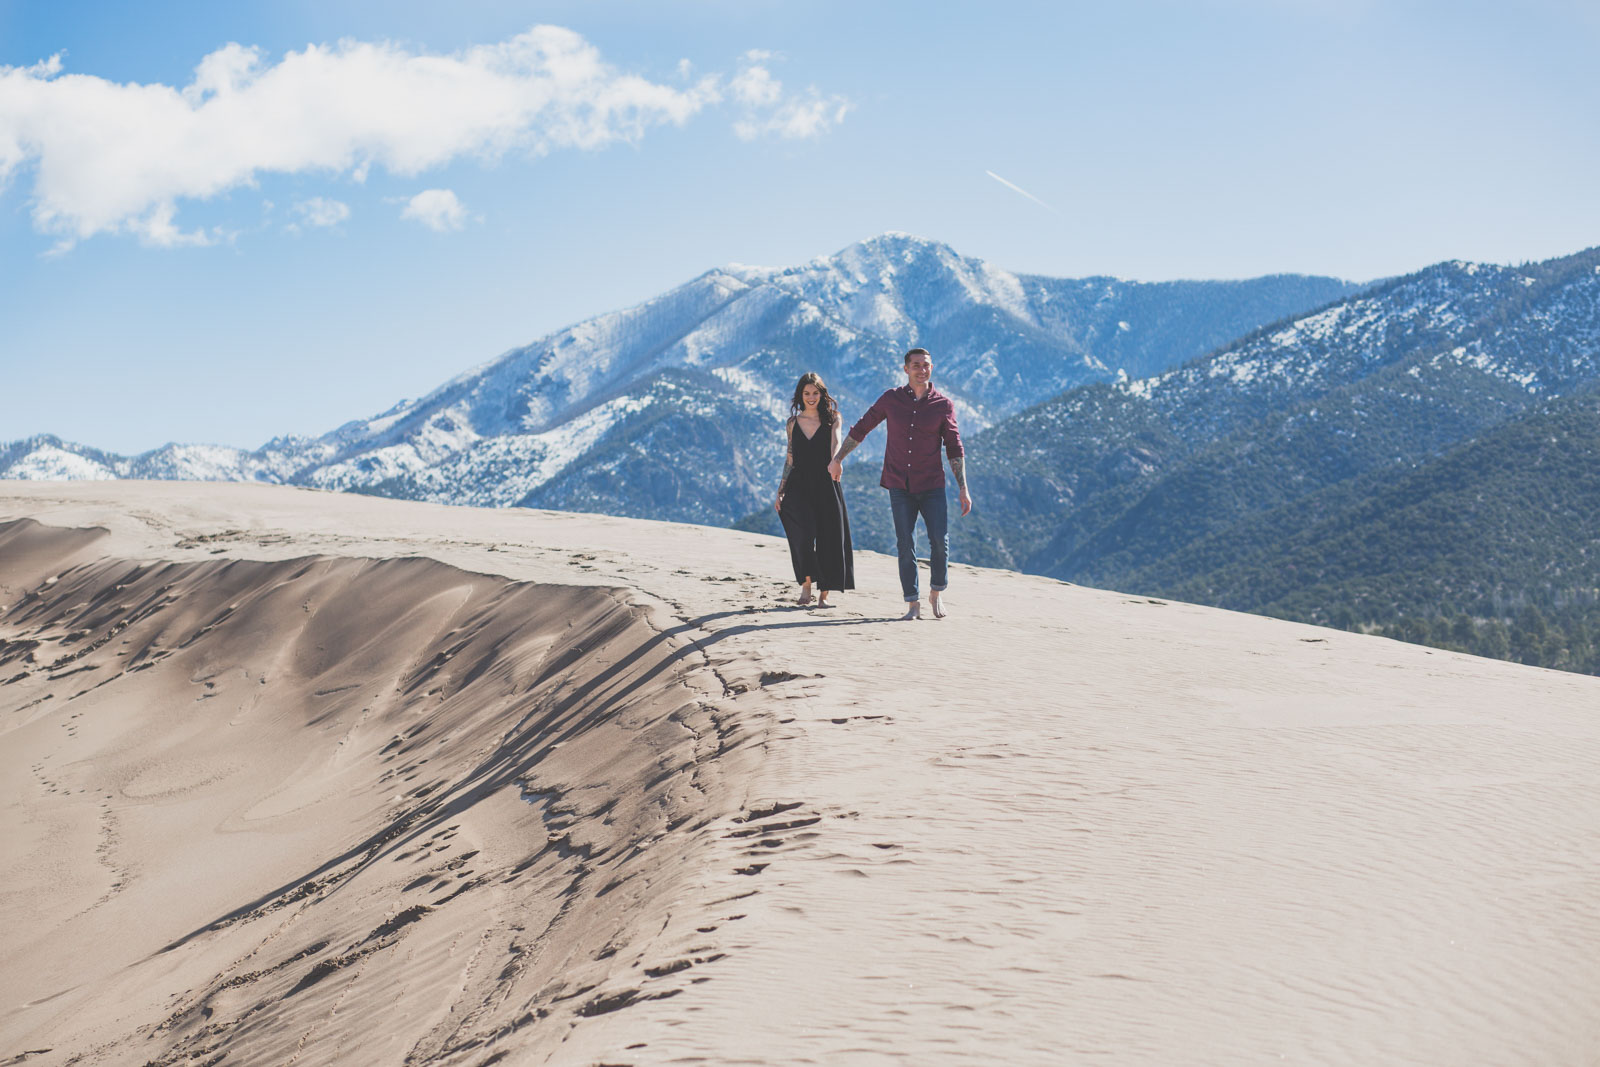 snow capped mountain Engagement session - Great Sand Dunes National Park, CO